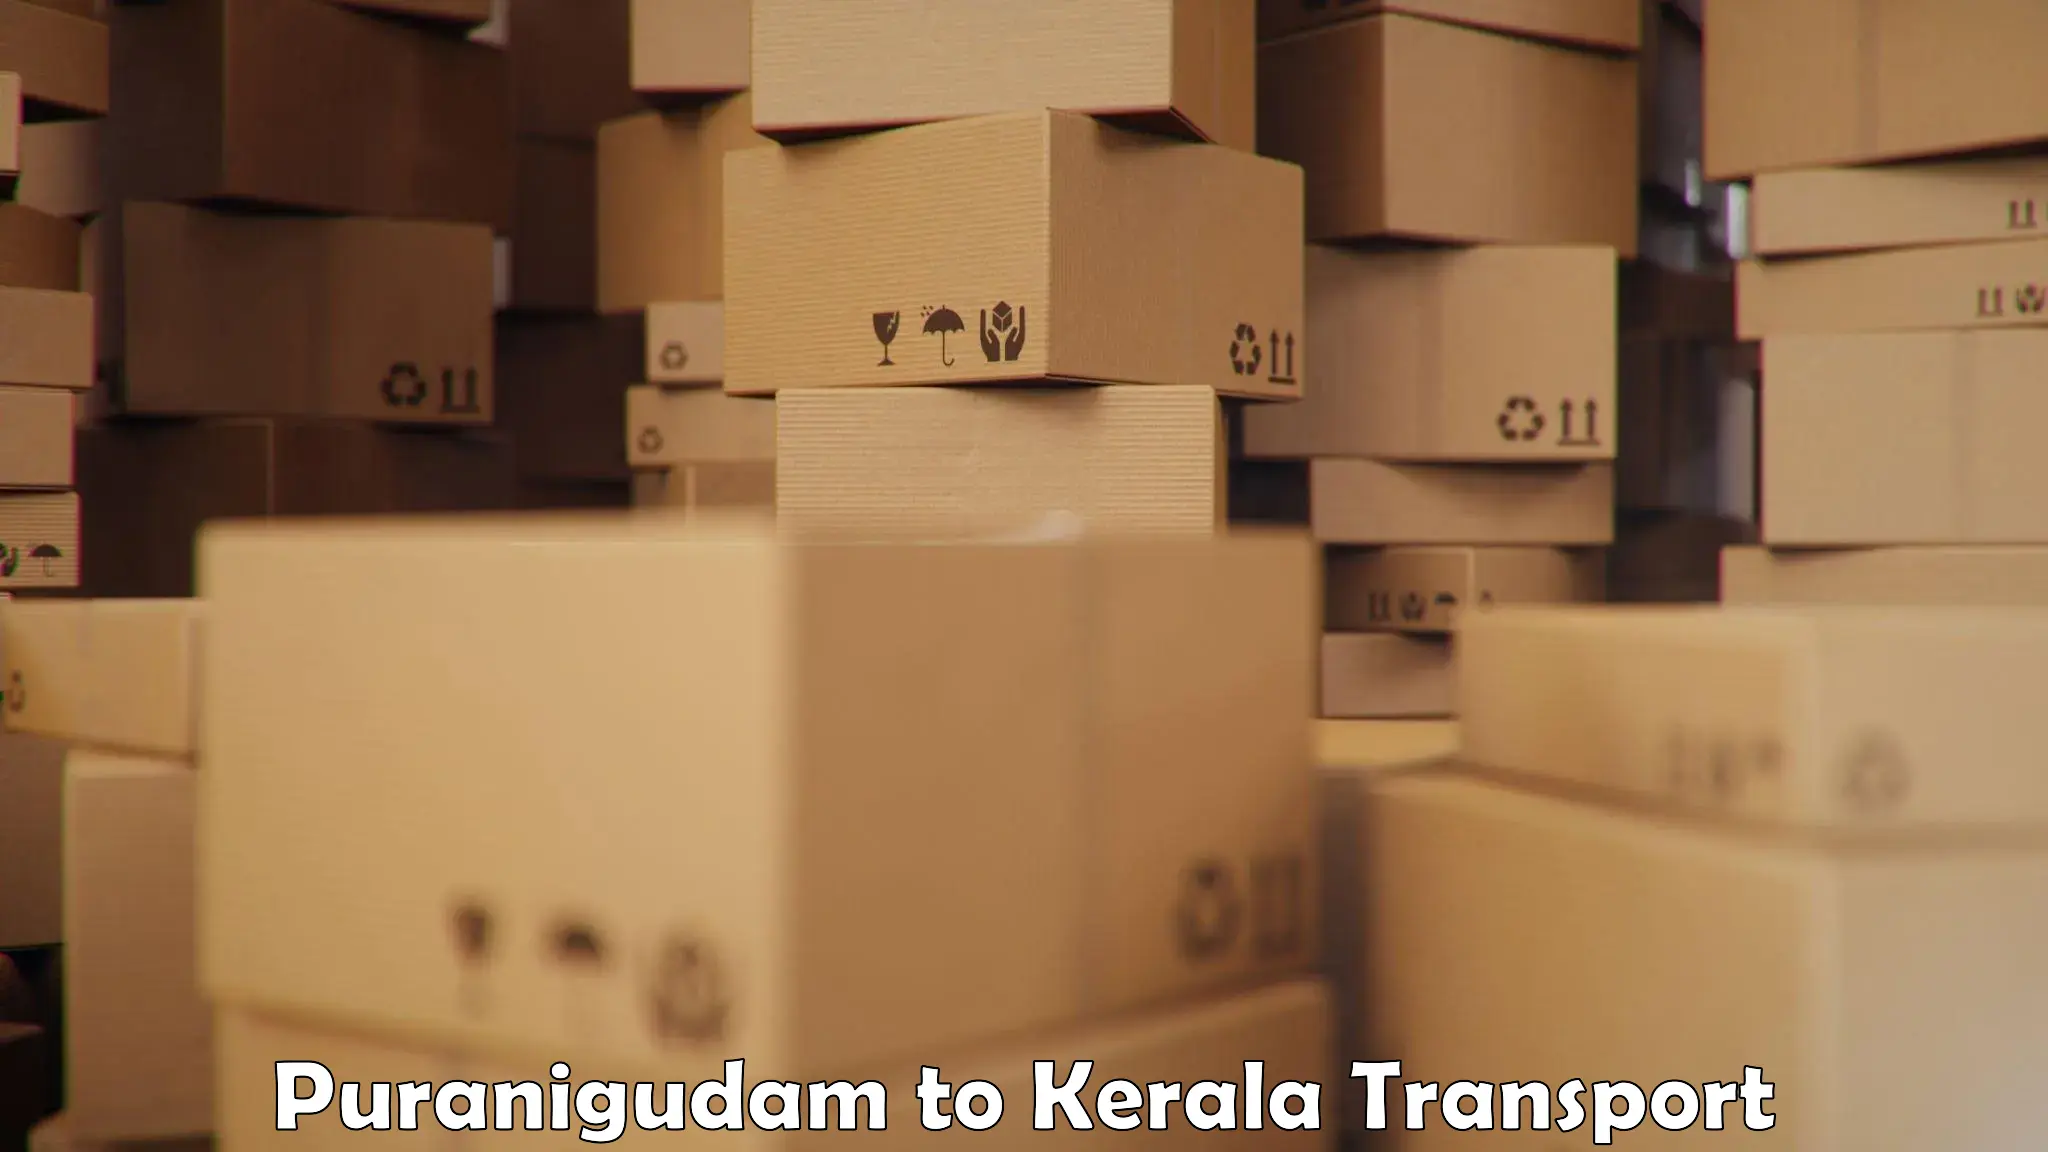 Road transport online services Puranigudam to Cochin University of Science and Technology